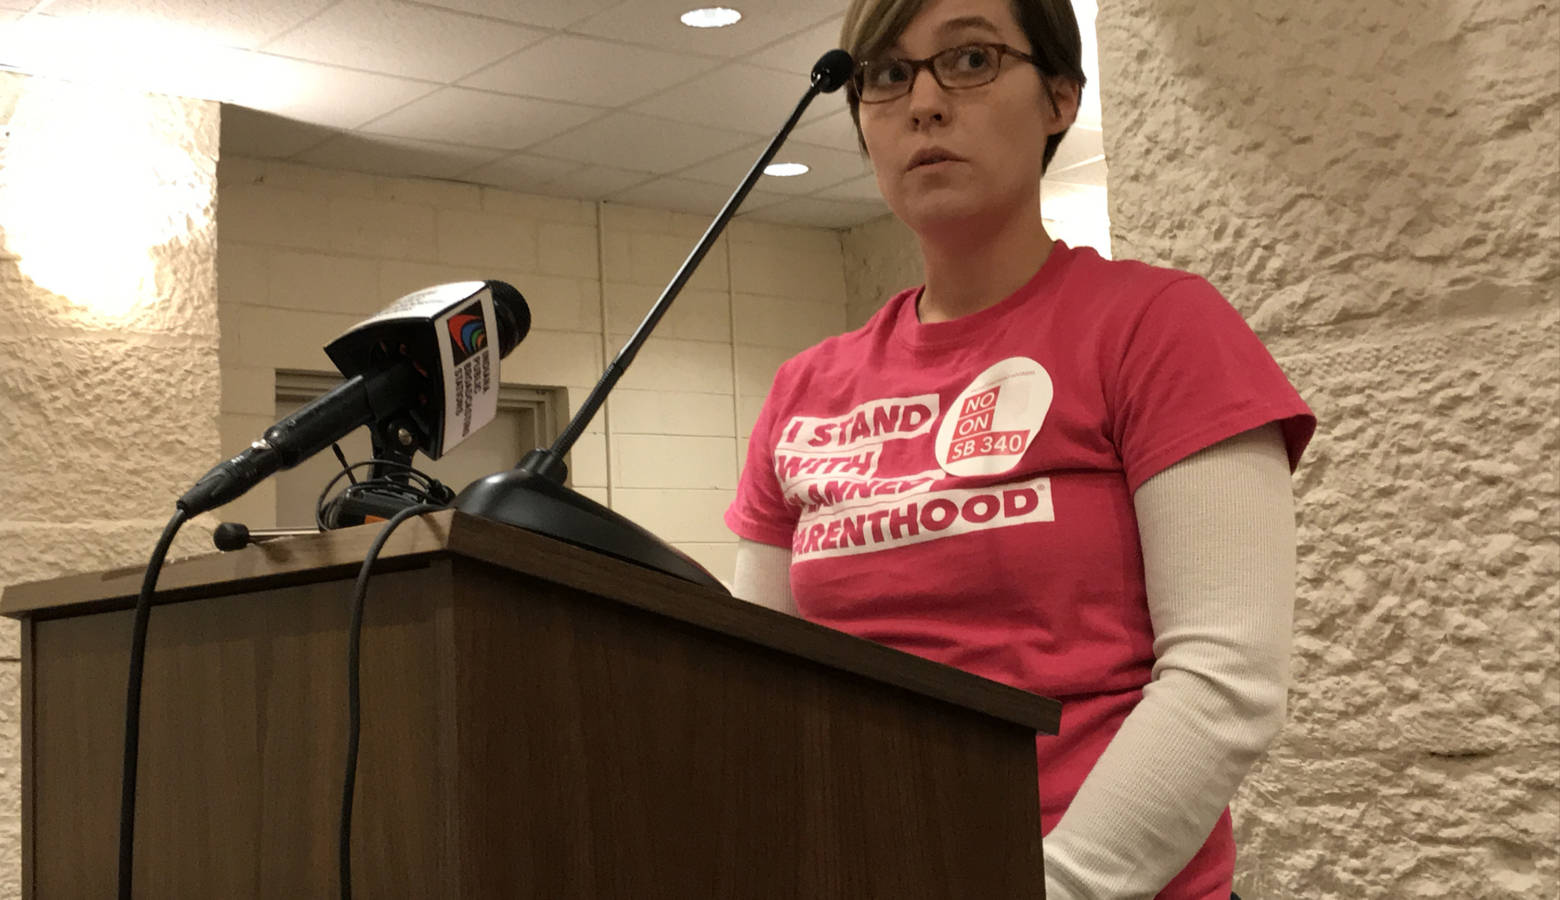 Indianapolis resident Colleen Donahoe testifies against an anti-abortion bill in a Senate committee. (Brandon Smith/IPB News)